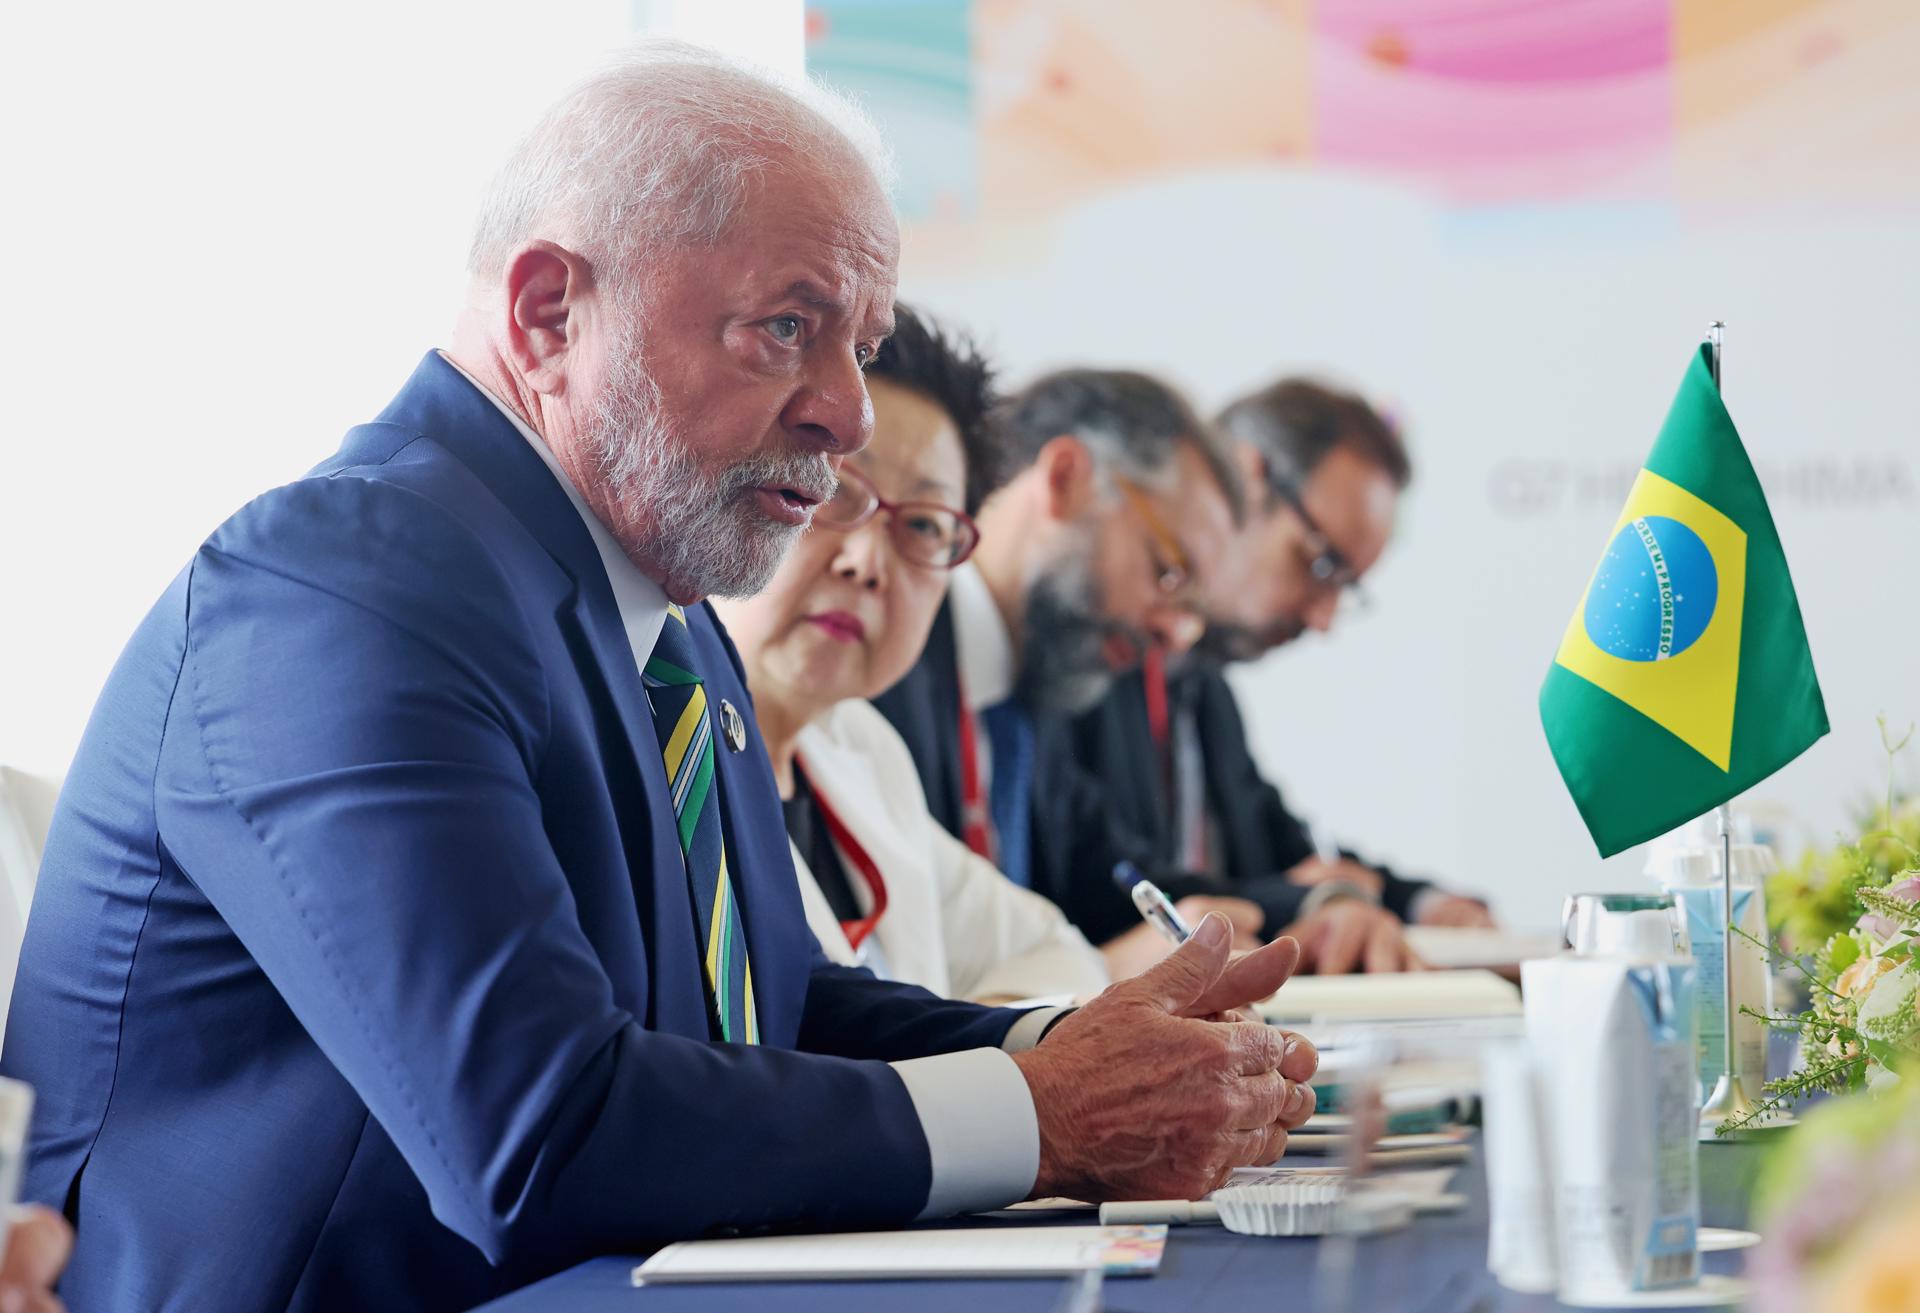 Brazil's President Luiz Inacio Lula da Silva (L) speaks during a bilateral meeting with Japan's Prime Minister Fumio Kishida (not pictured) on the sidelines of the G7 Hiroshima Summit in Hiroshima, Japan, 20 May 2023. EFE/EPA/JAPAN POOL JAPAN OUT EDITORIAL USE ONLY/NO SALES